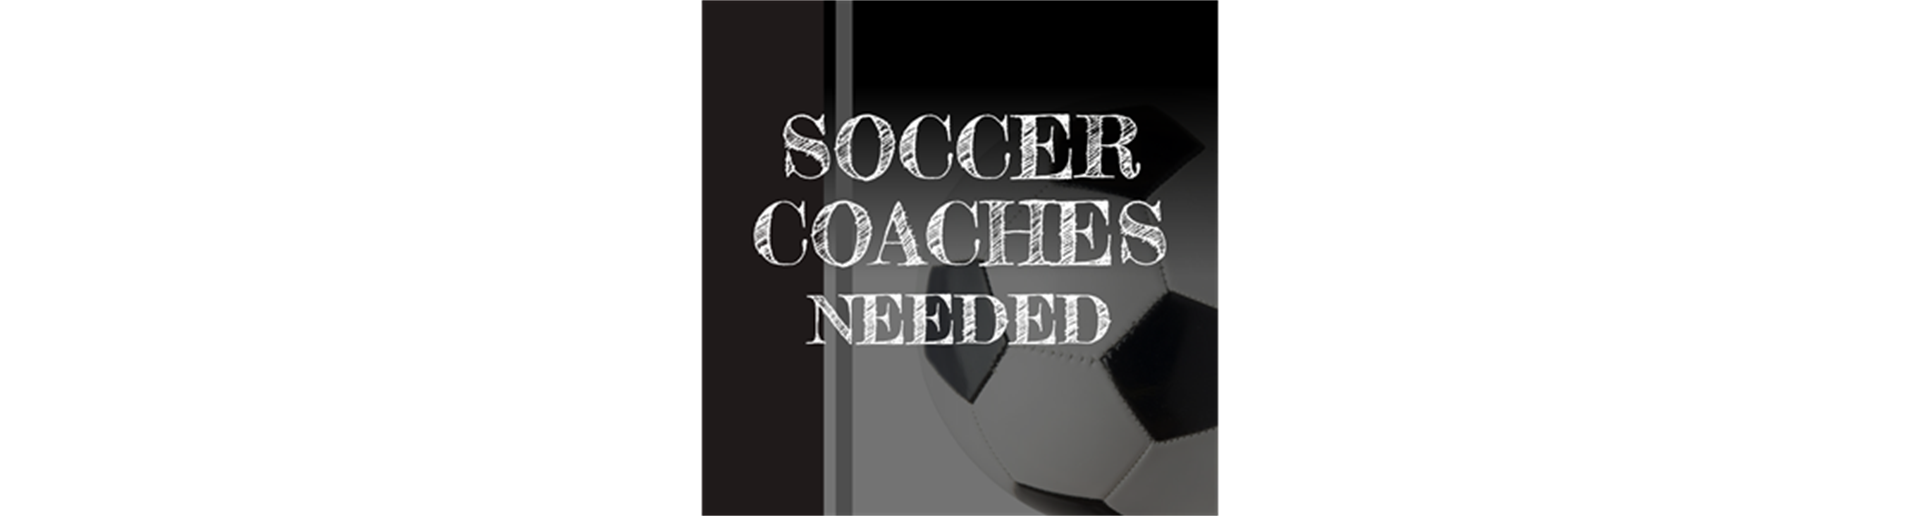 Coached Needed